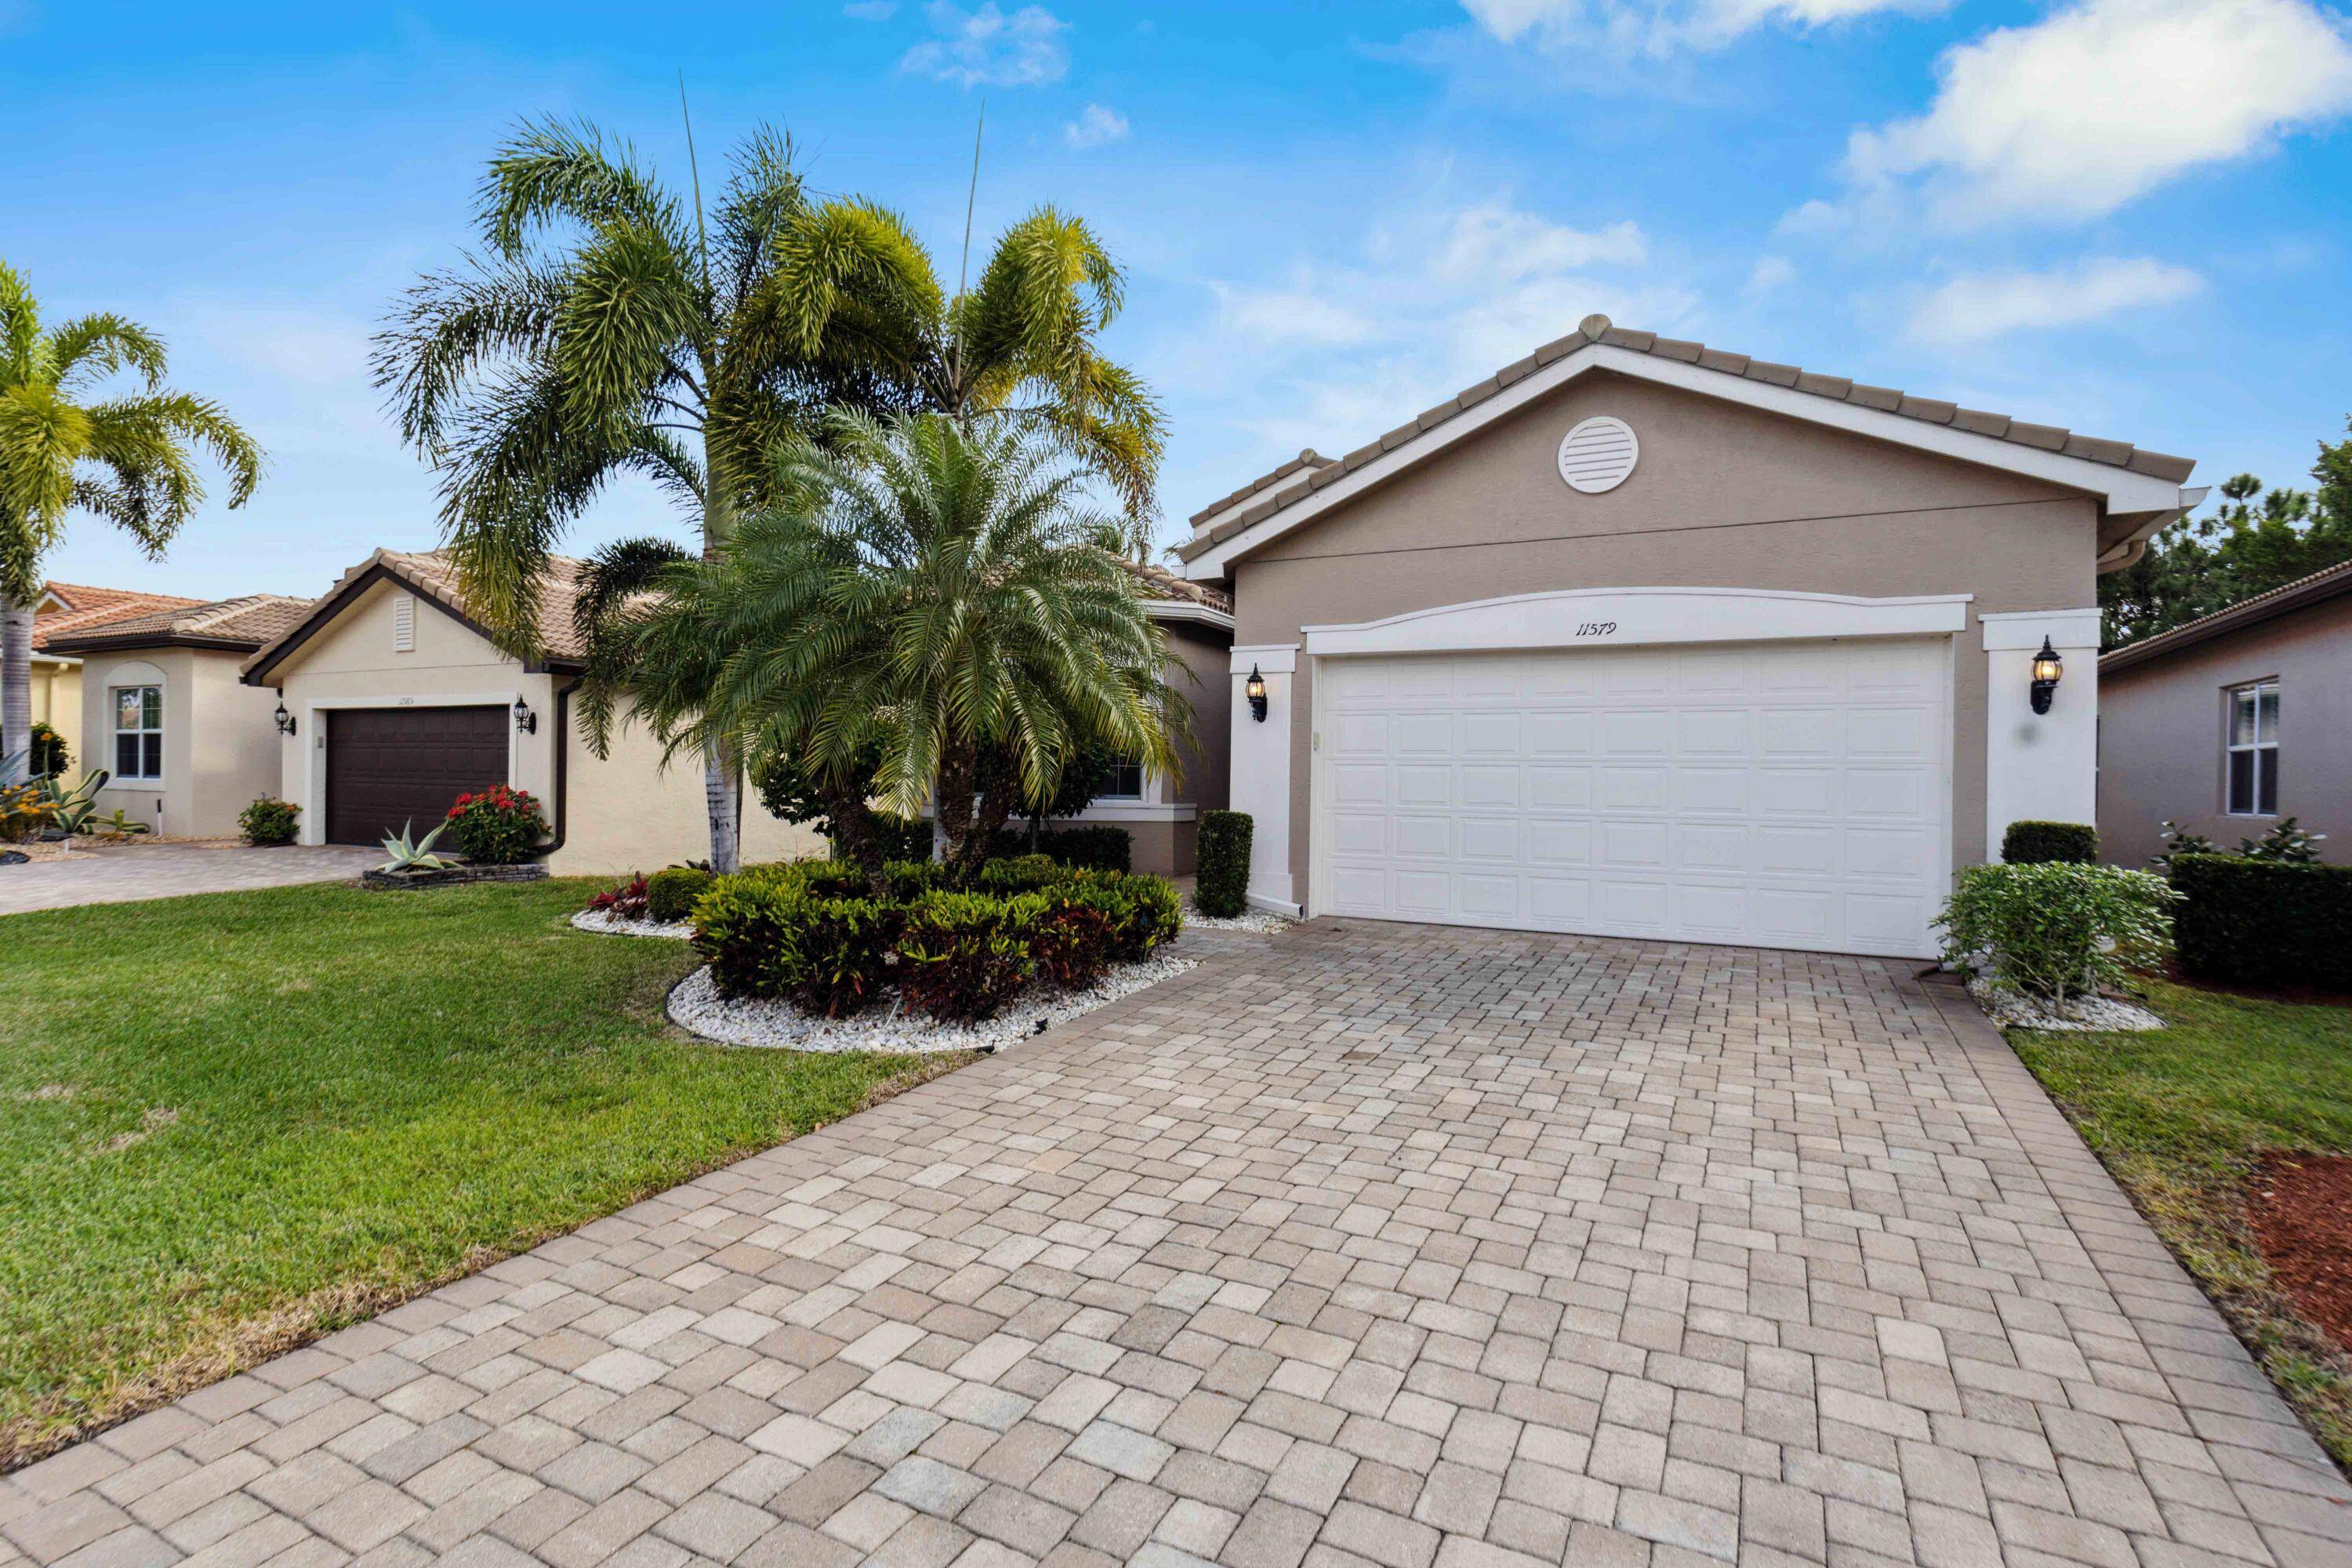 This rarely available ''Bimini'' model is situated on a lushly landscaped private lot boasting Impact windows doors, diagonally laid Porcelain Tile flooring, Coffered ceilings, Designer light fixtures, fans, and window ...